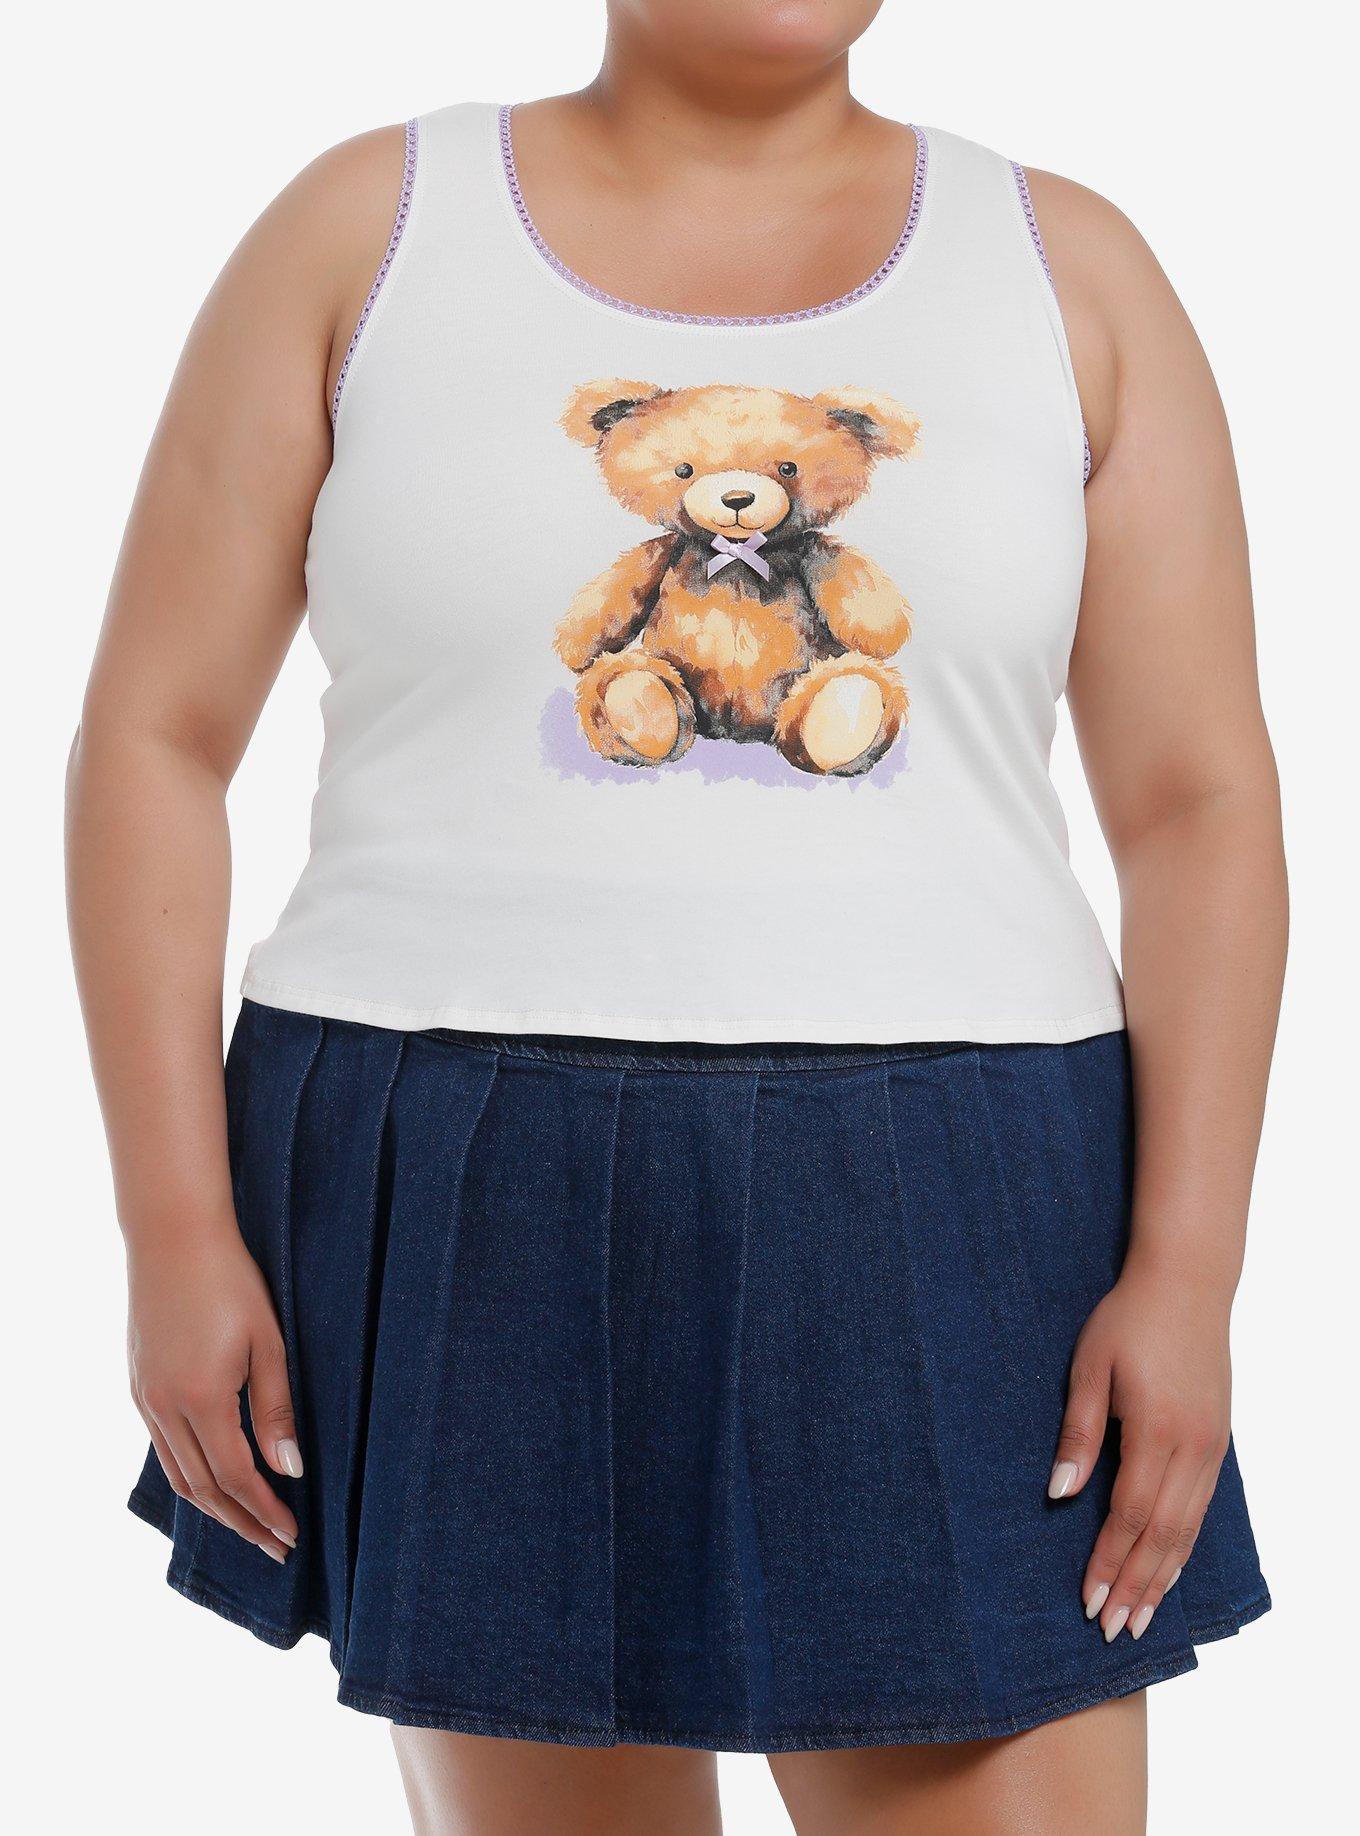 Sweet Society Teddy Bear Lavender Lace Girls Tank Top Plus Size, LAVENDER, hi-res